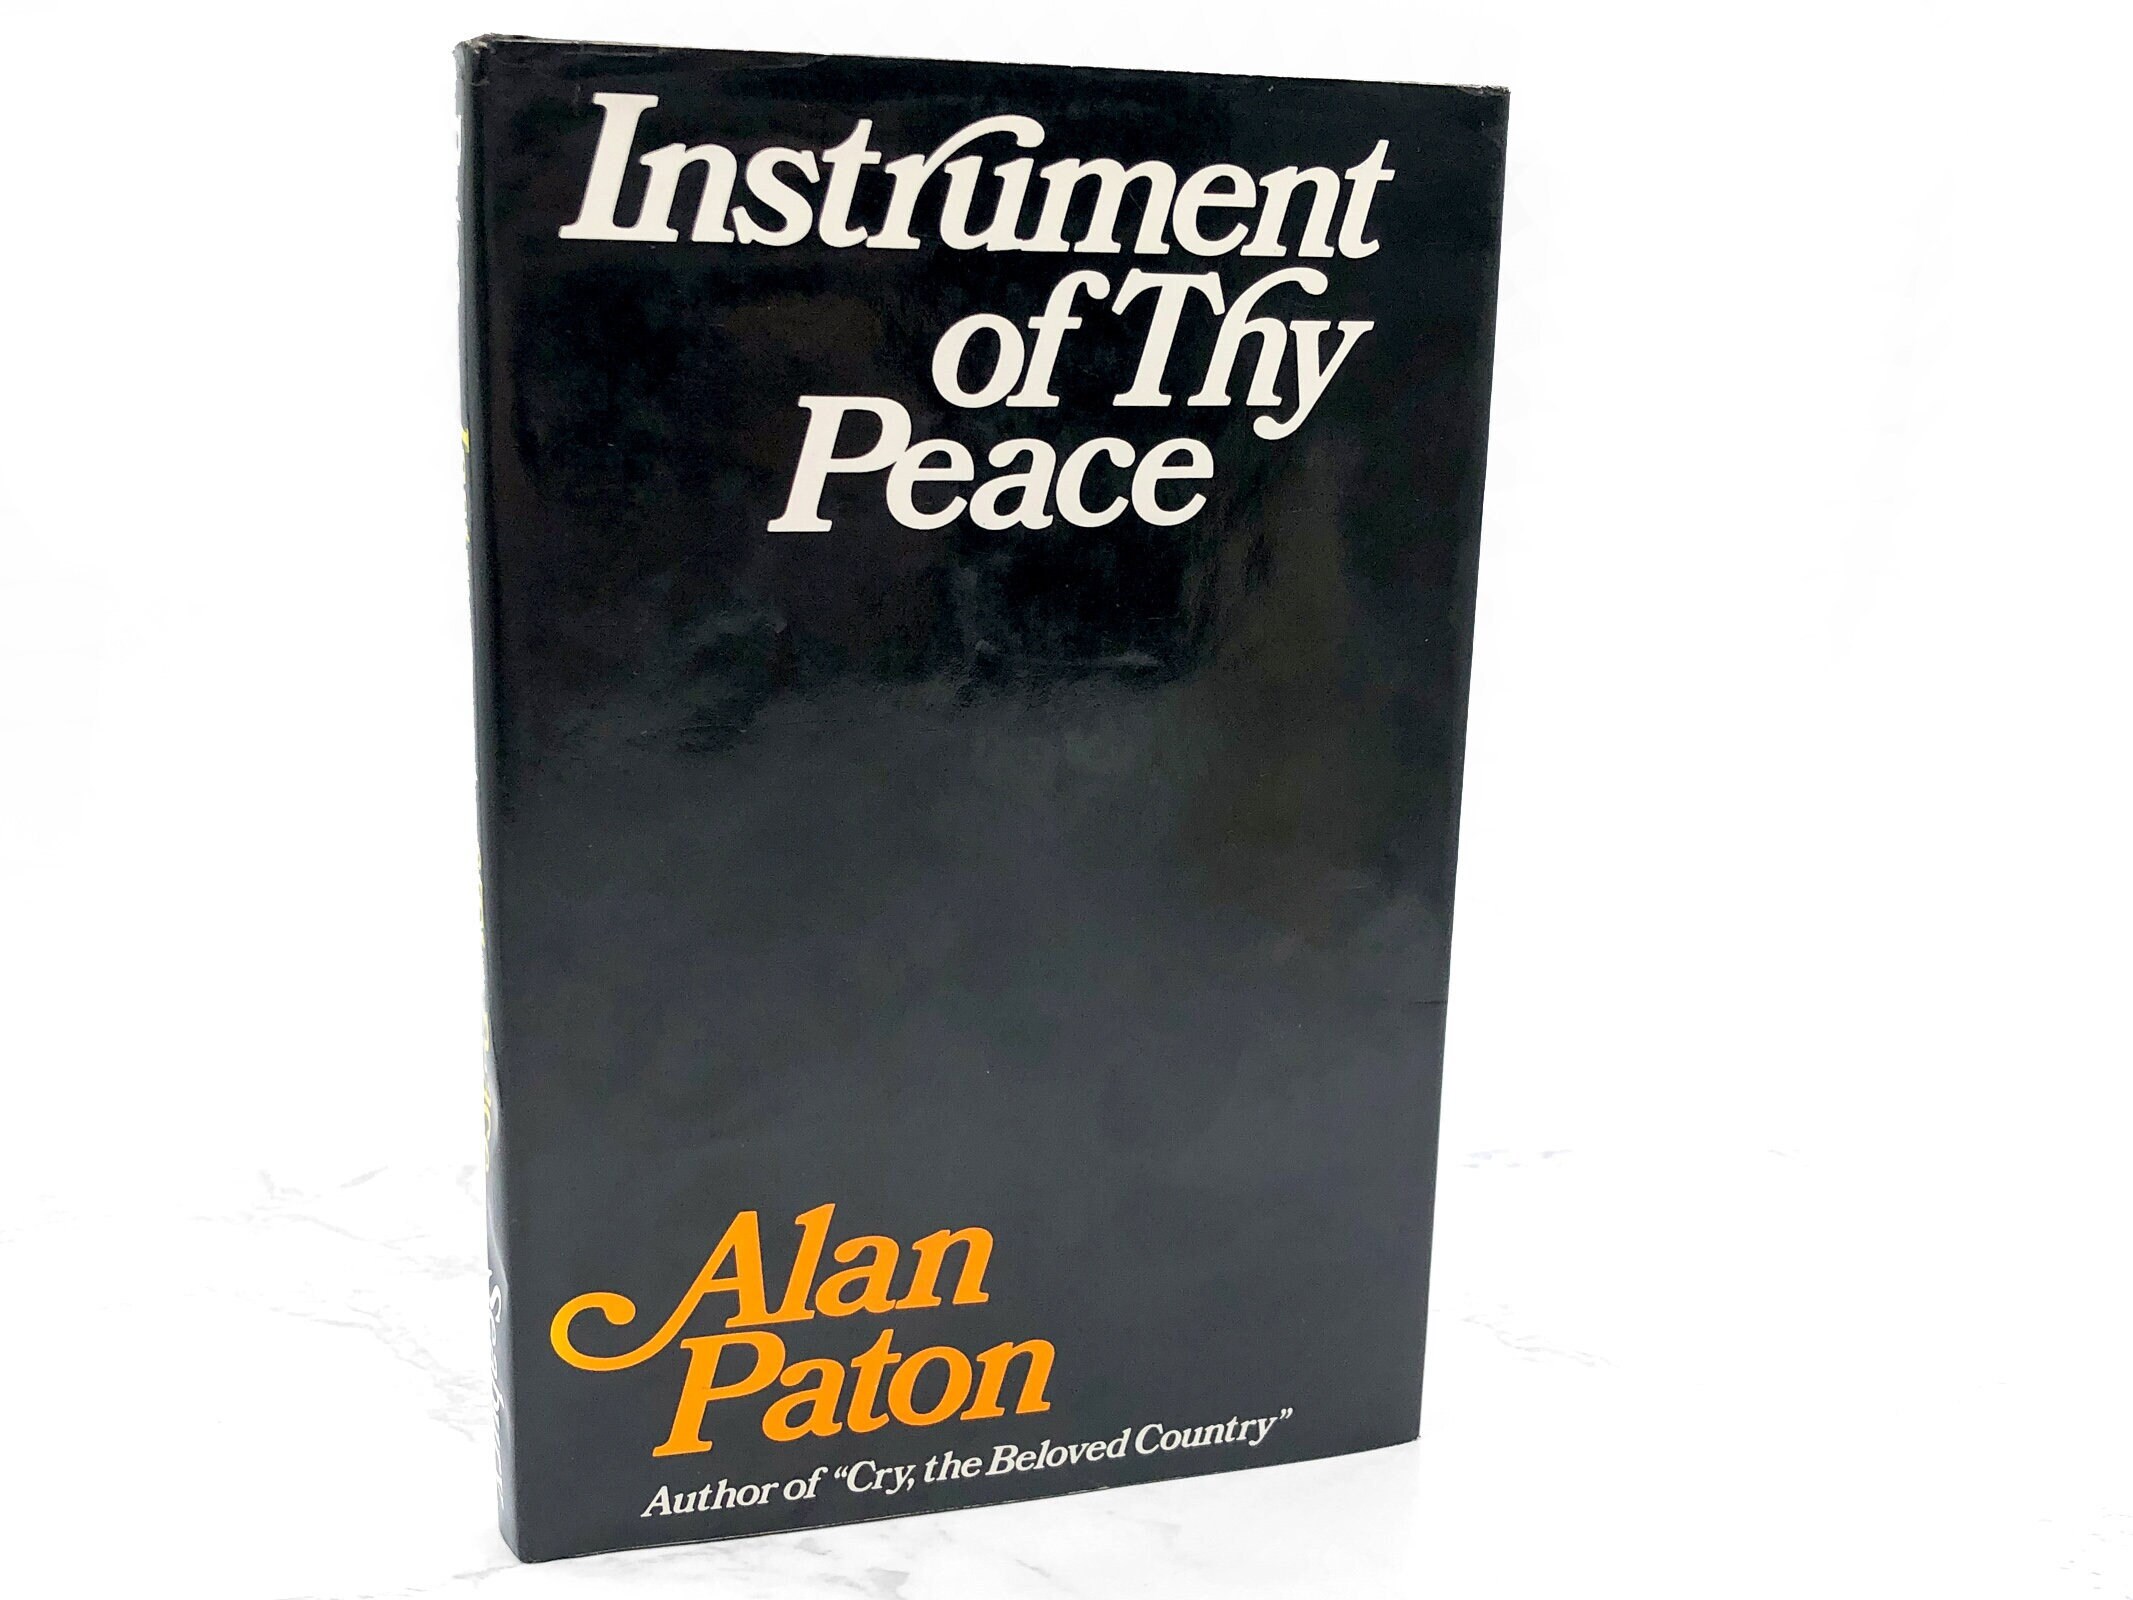 Instrument of Thy peace: The Prayer of St. Francis book by Alan Paton